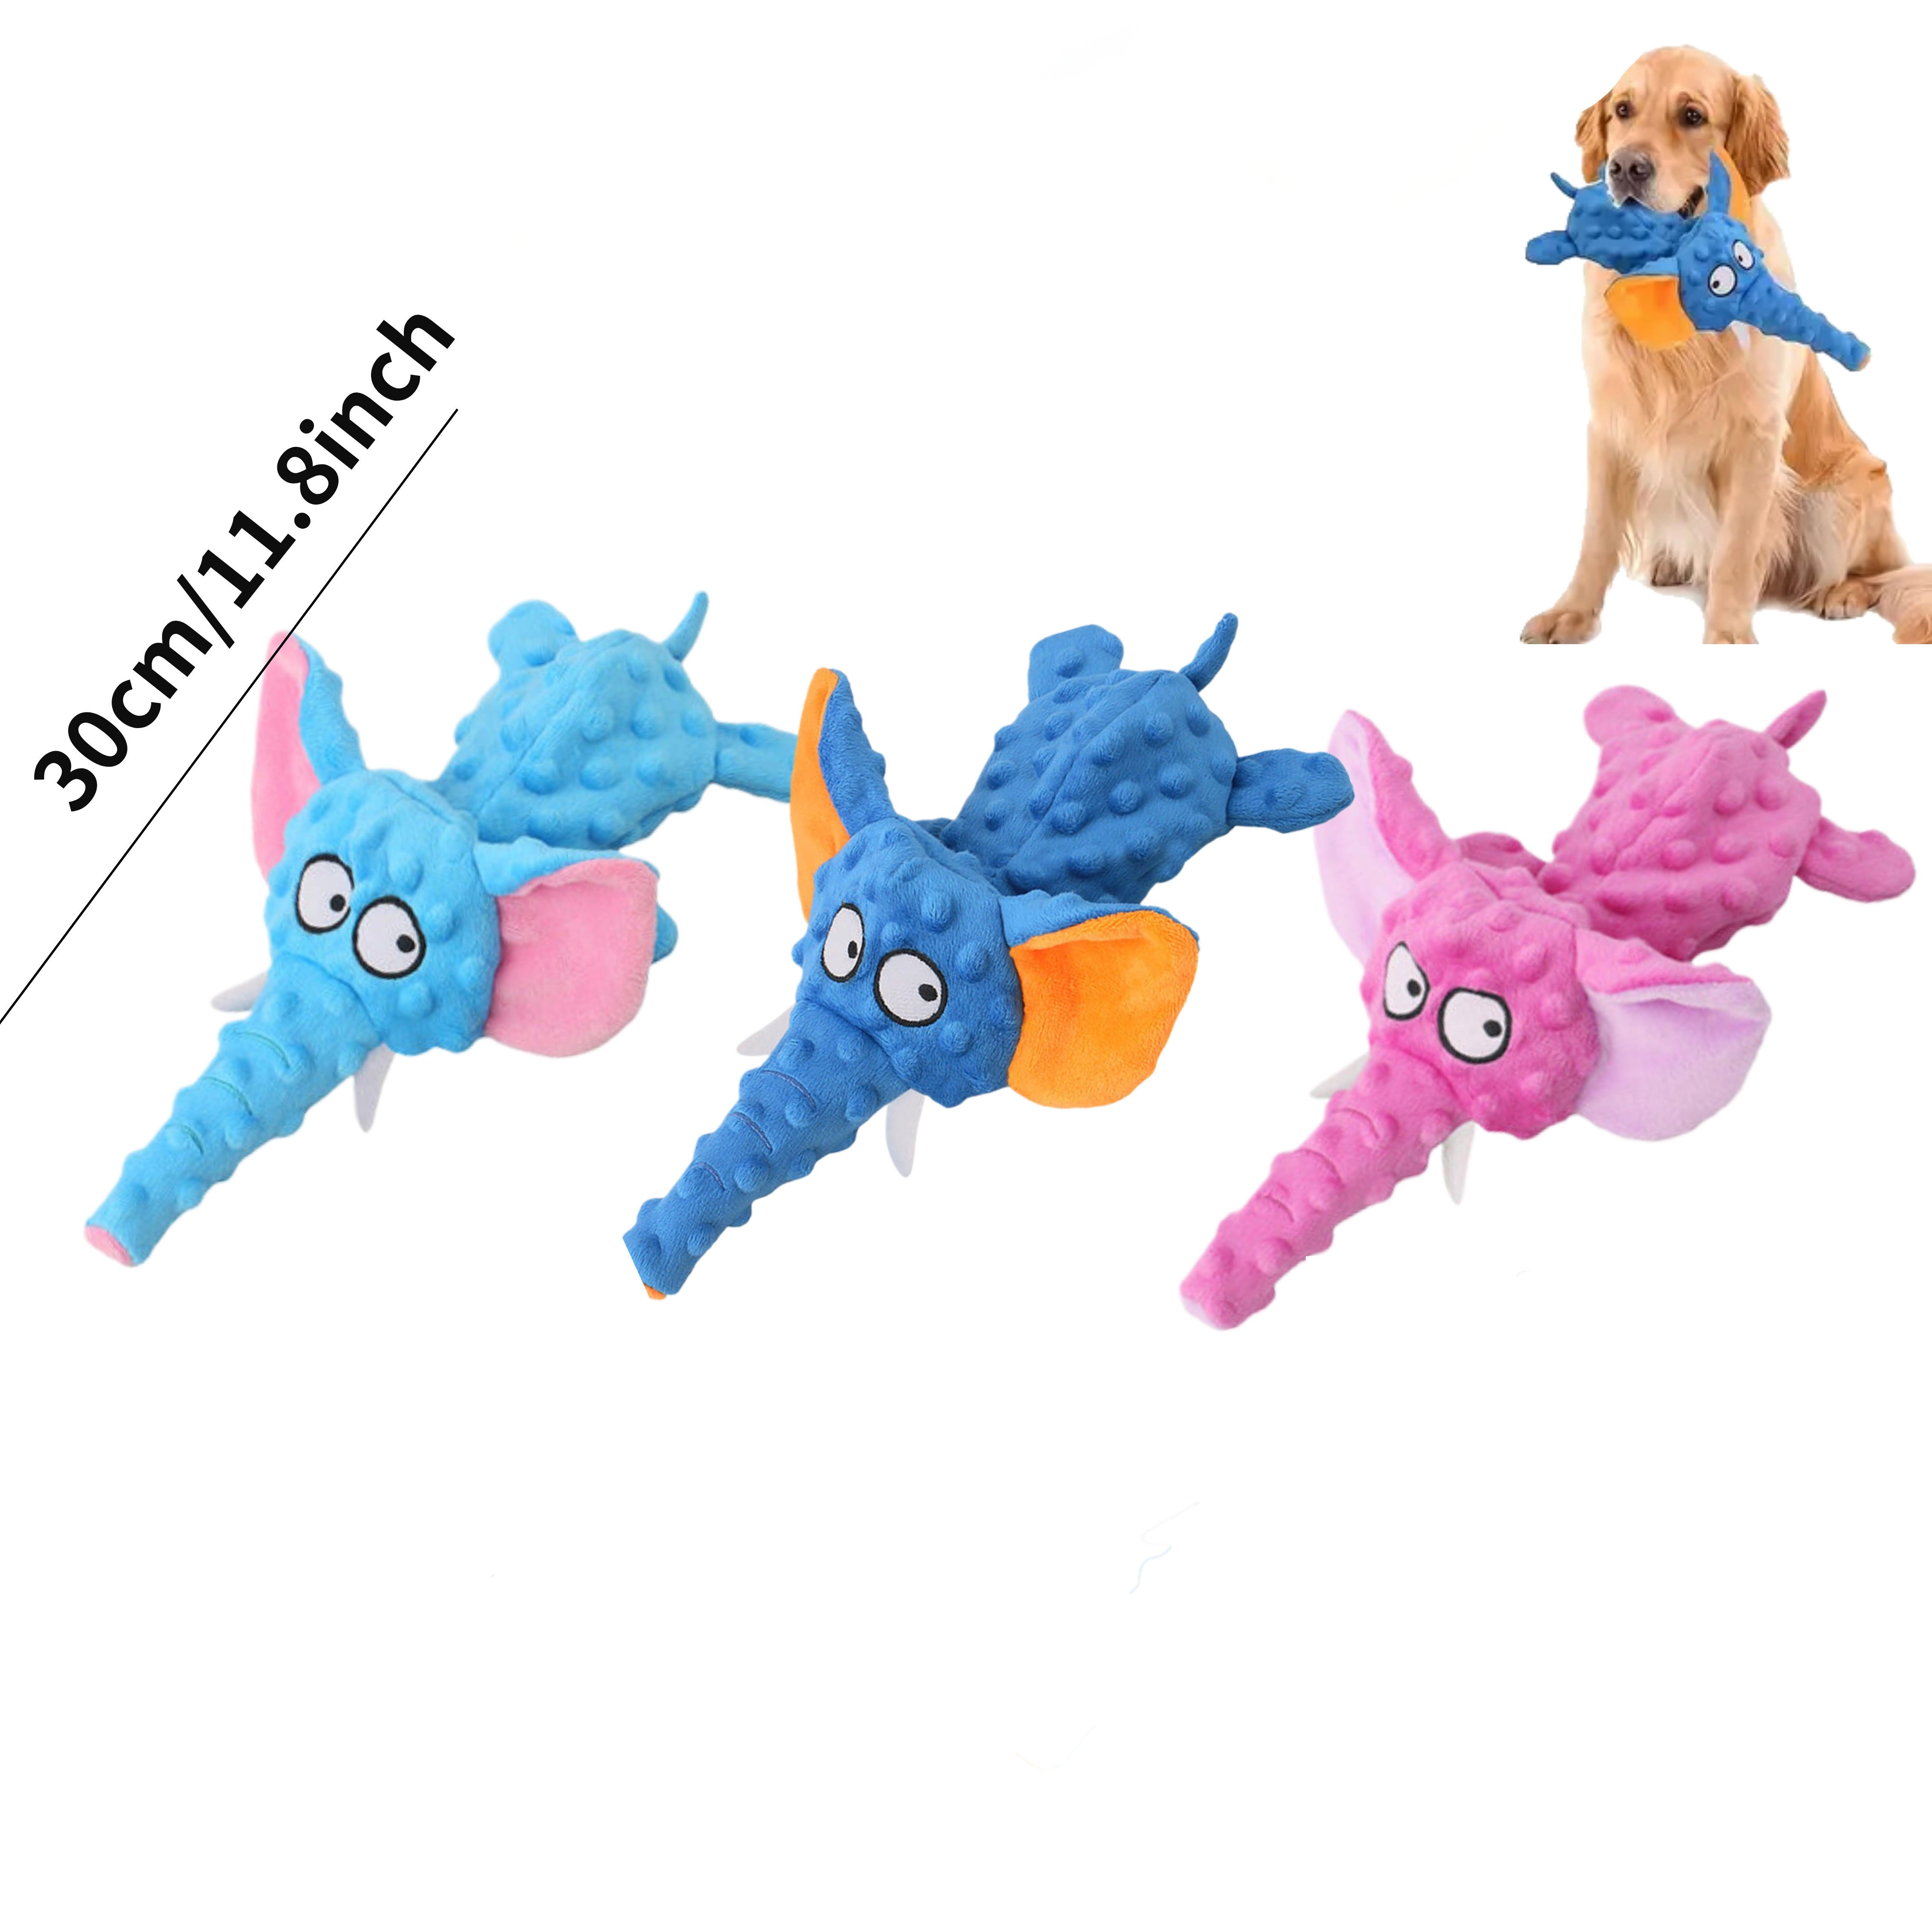 

1pc Elephant Design Pet Grinding Teeth Squeaky Plush Toy, Chewing Toy For Dog Interactive Supply